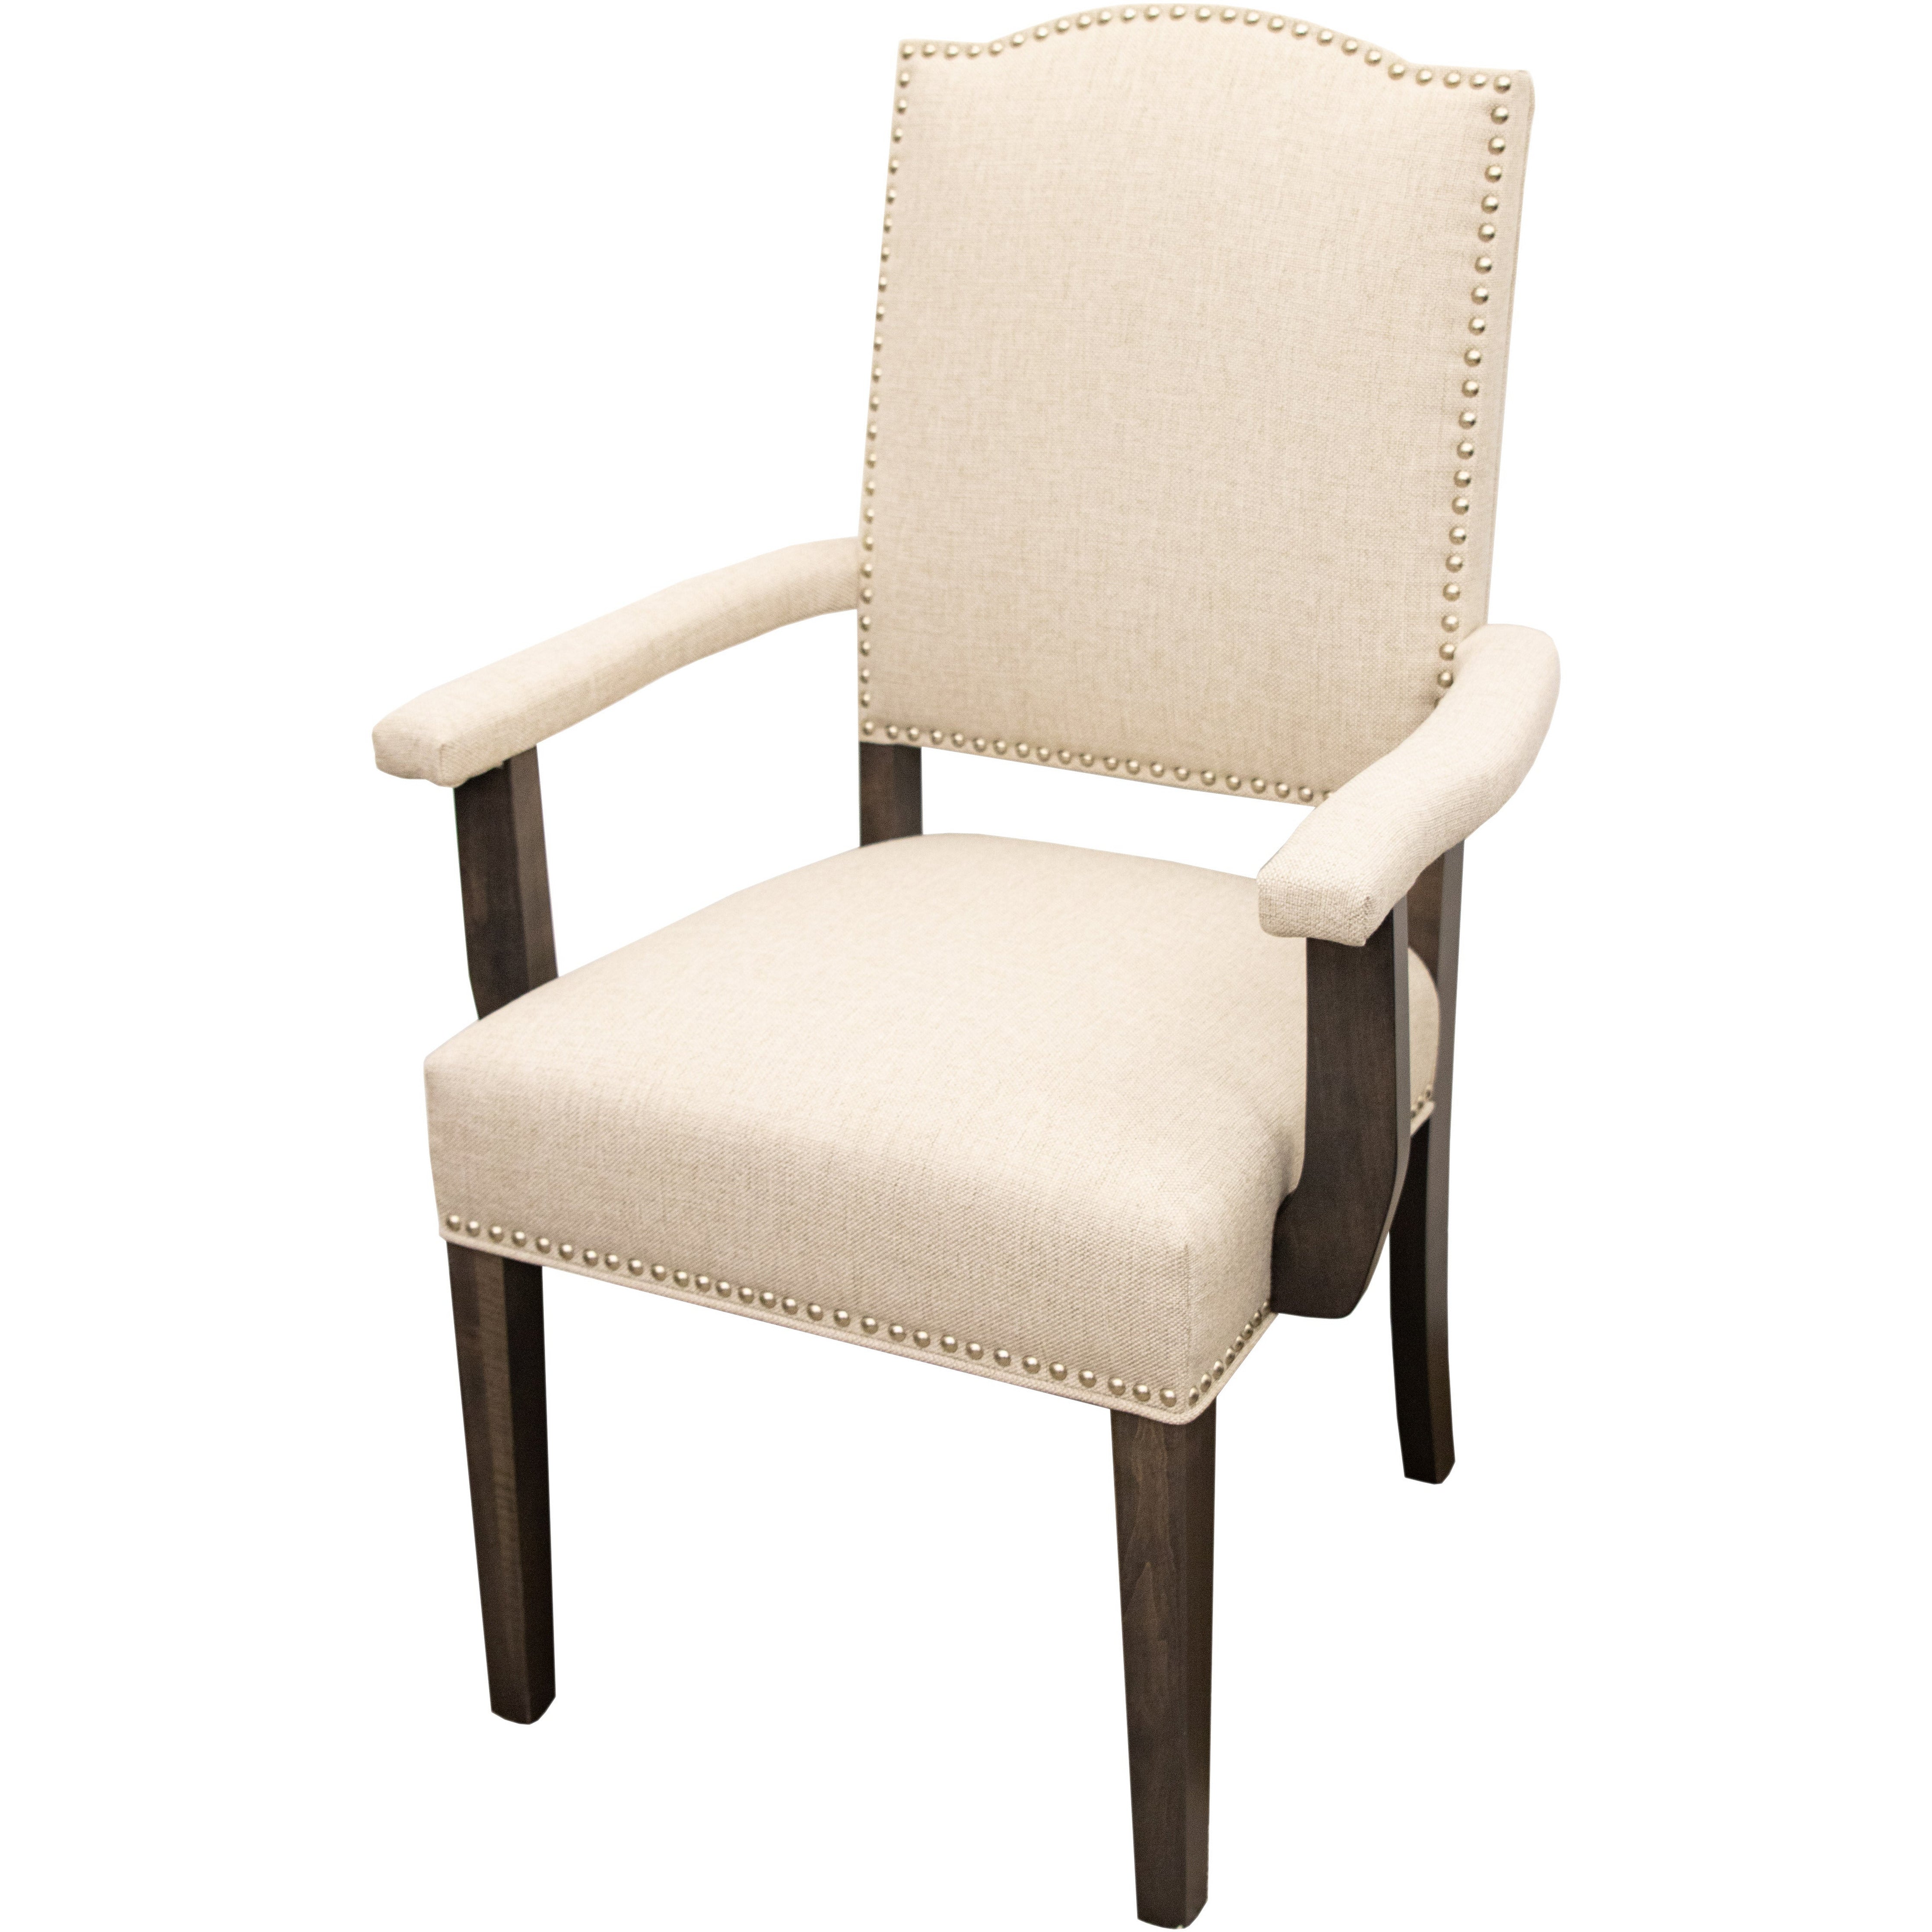 Emerson Upholstered Dining Chair with Fabric Arms